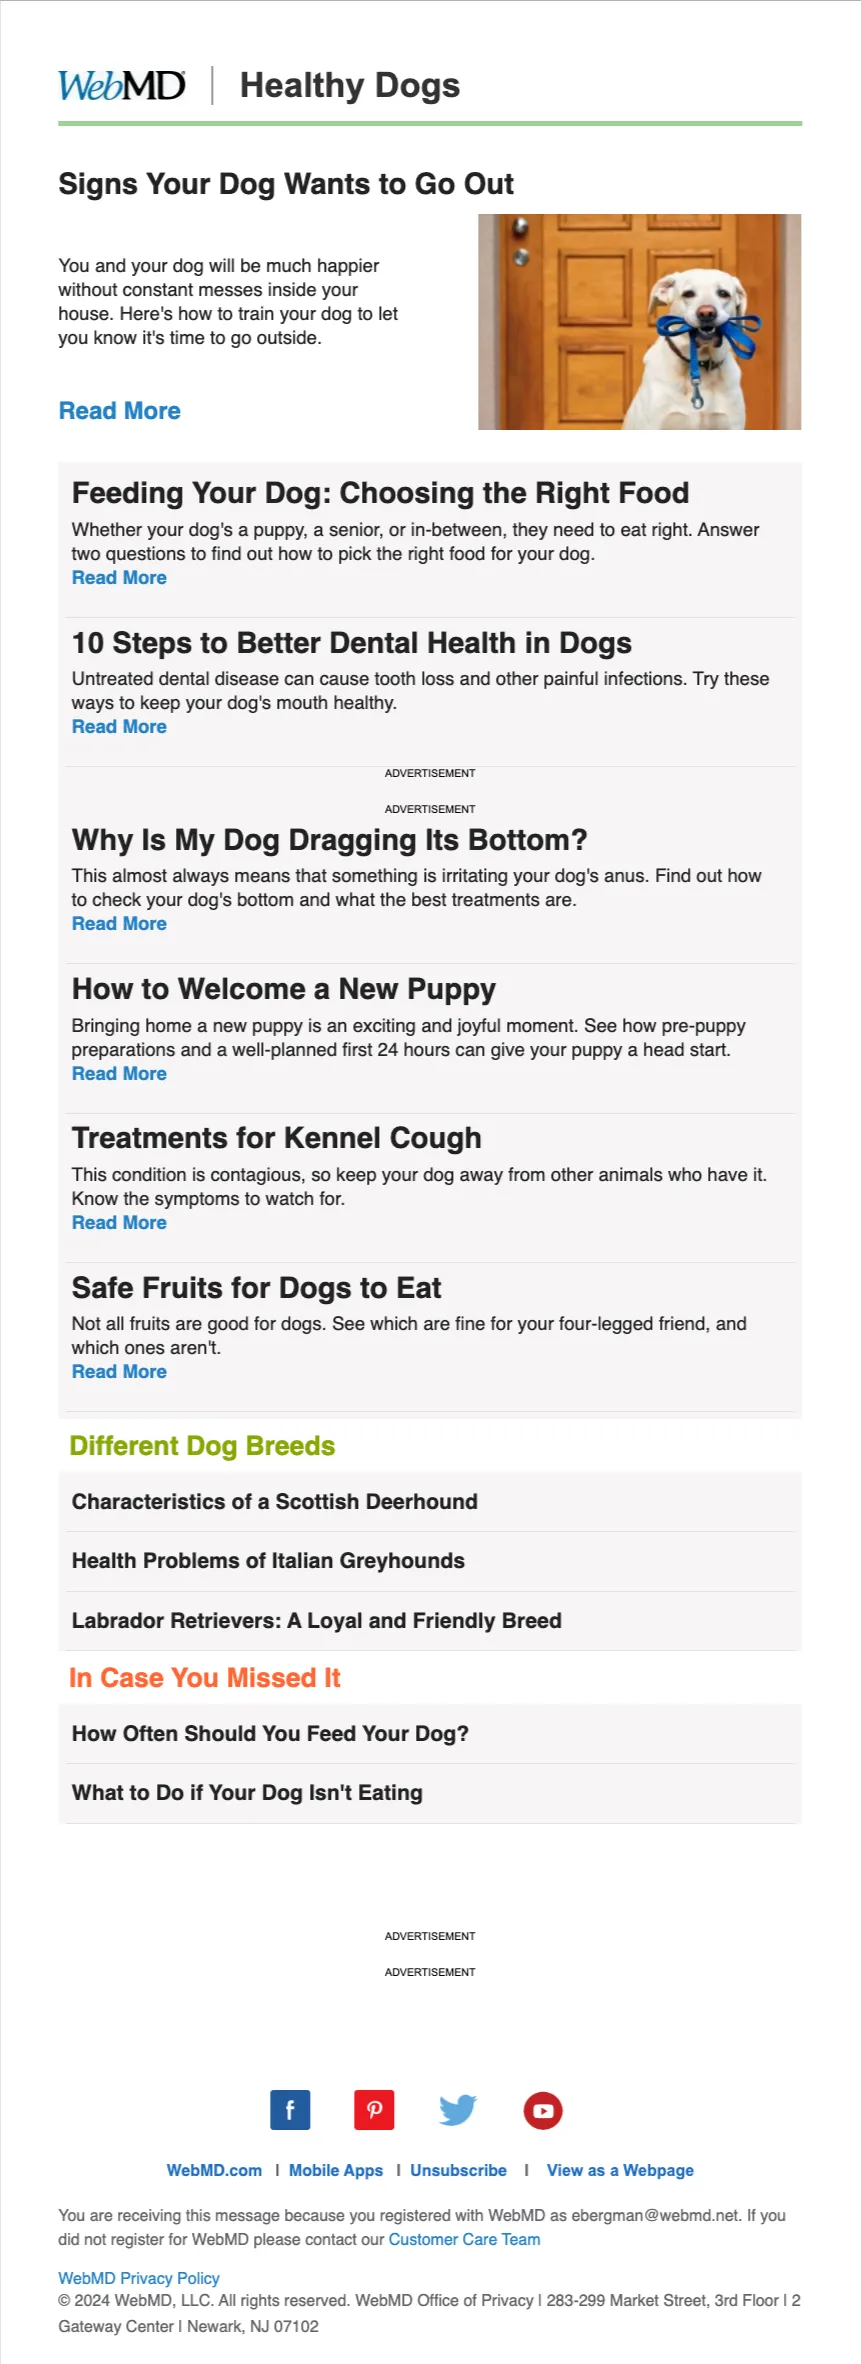 Healthy Dogs